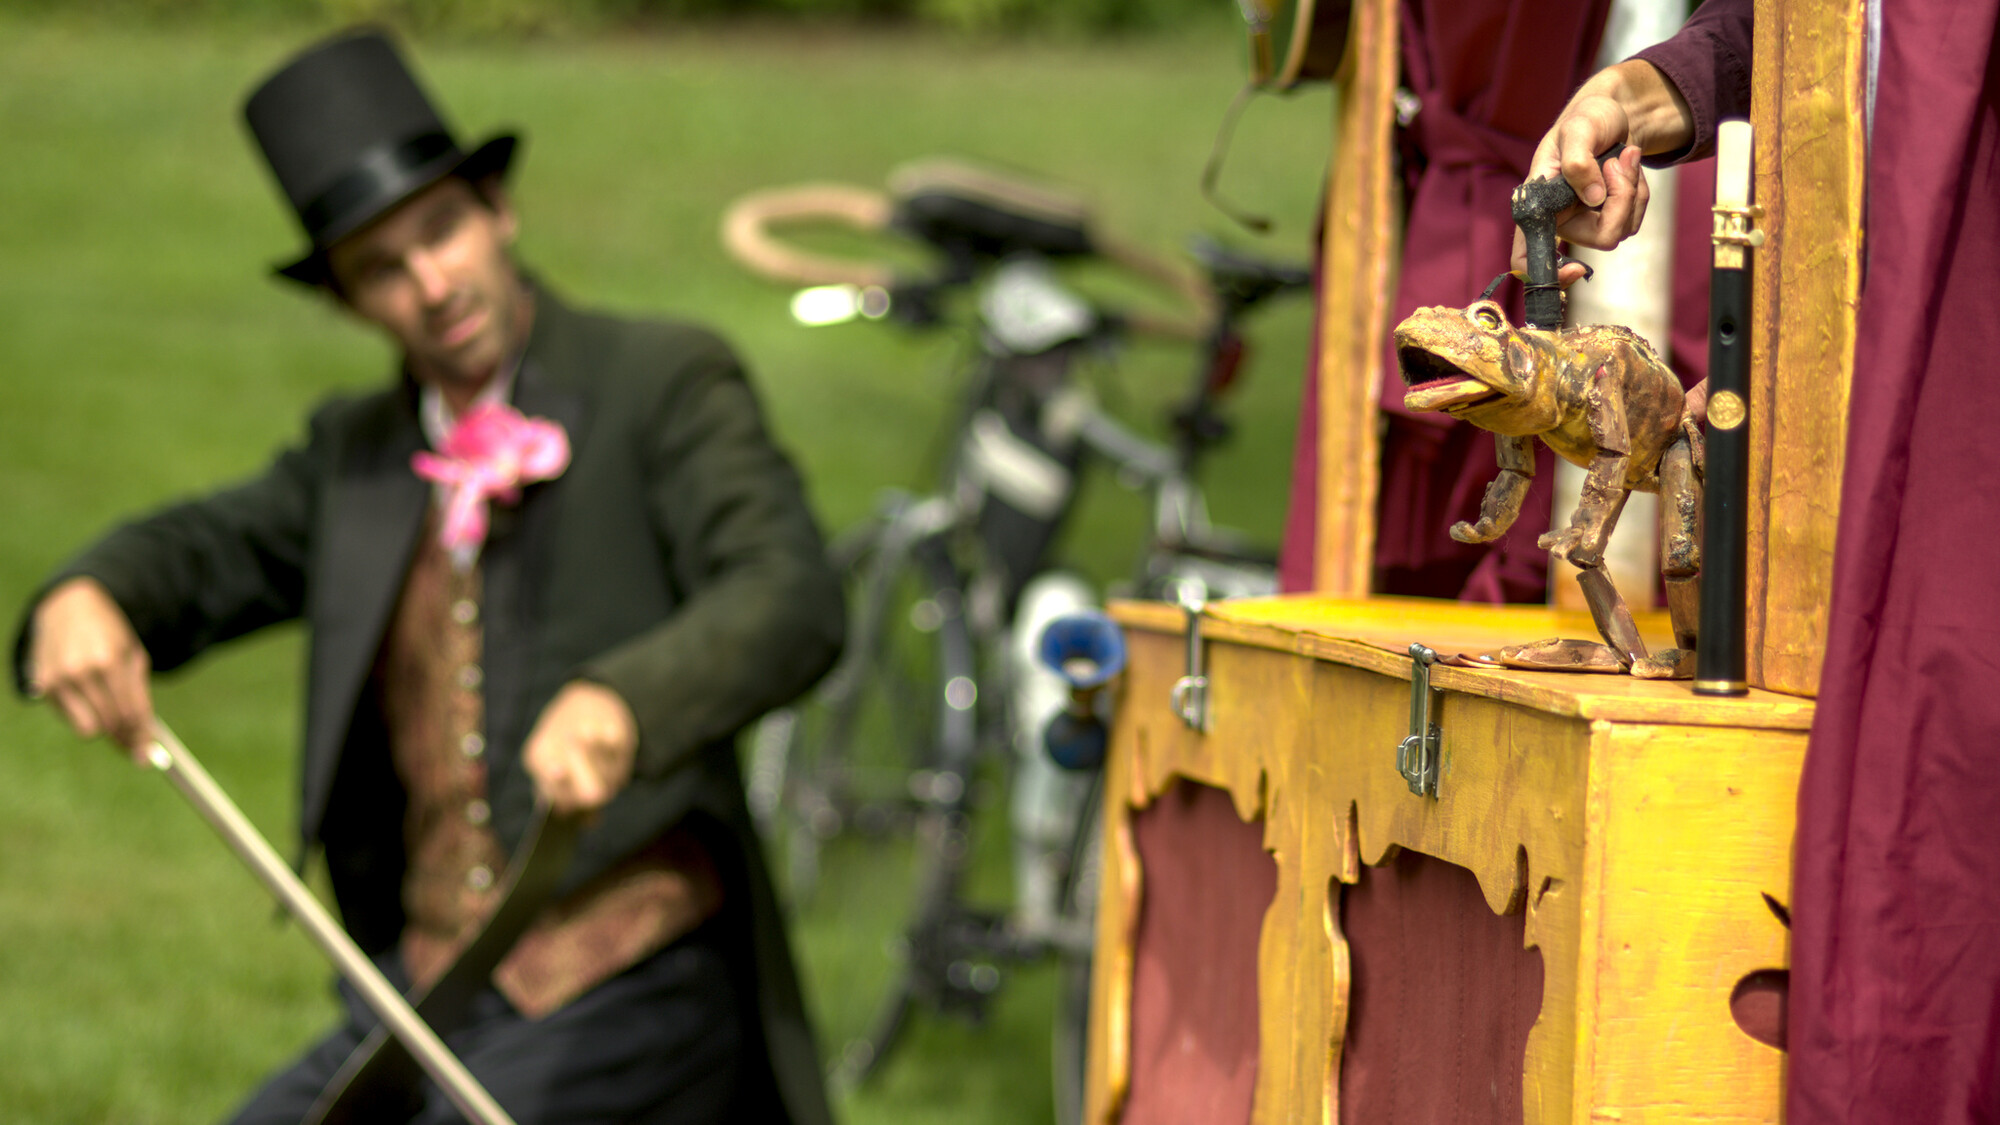 A performer in a top hat with a cane, performing alongside puppets.